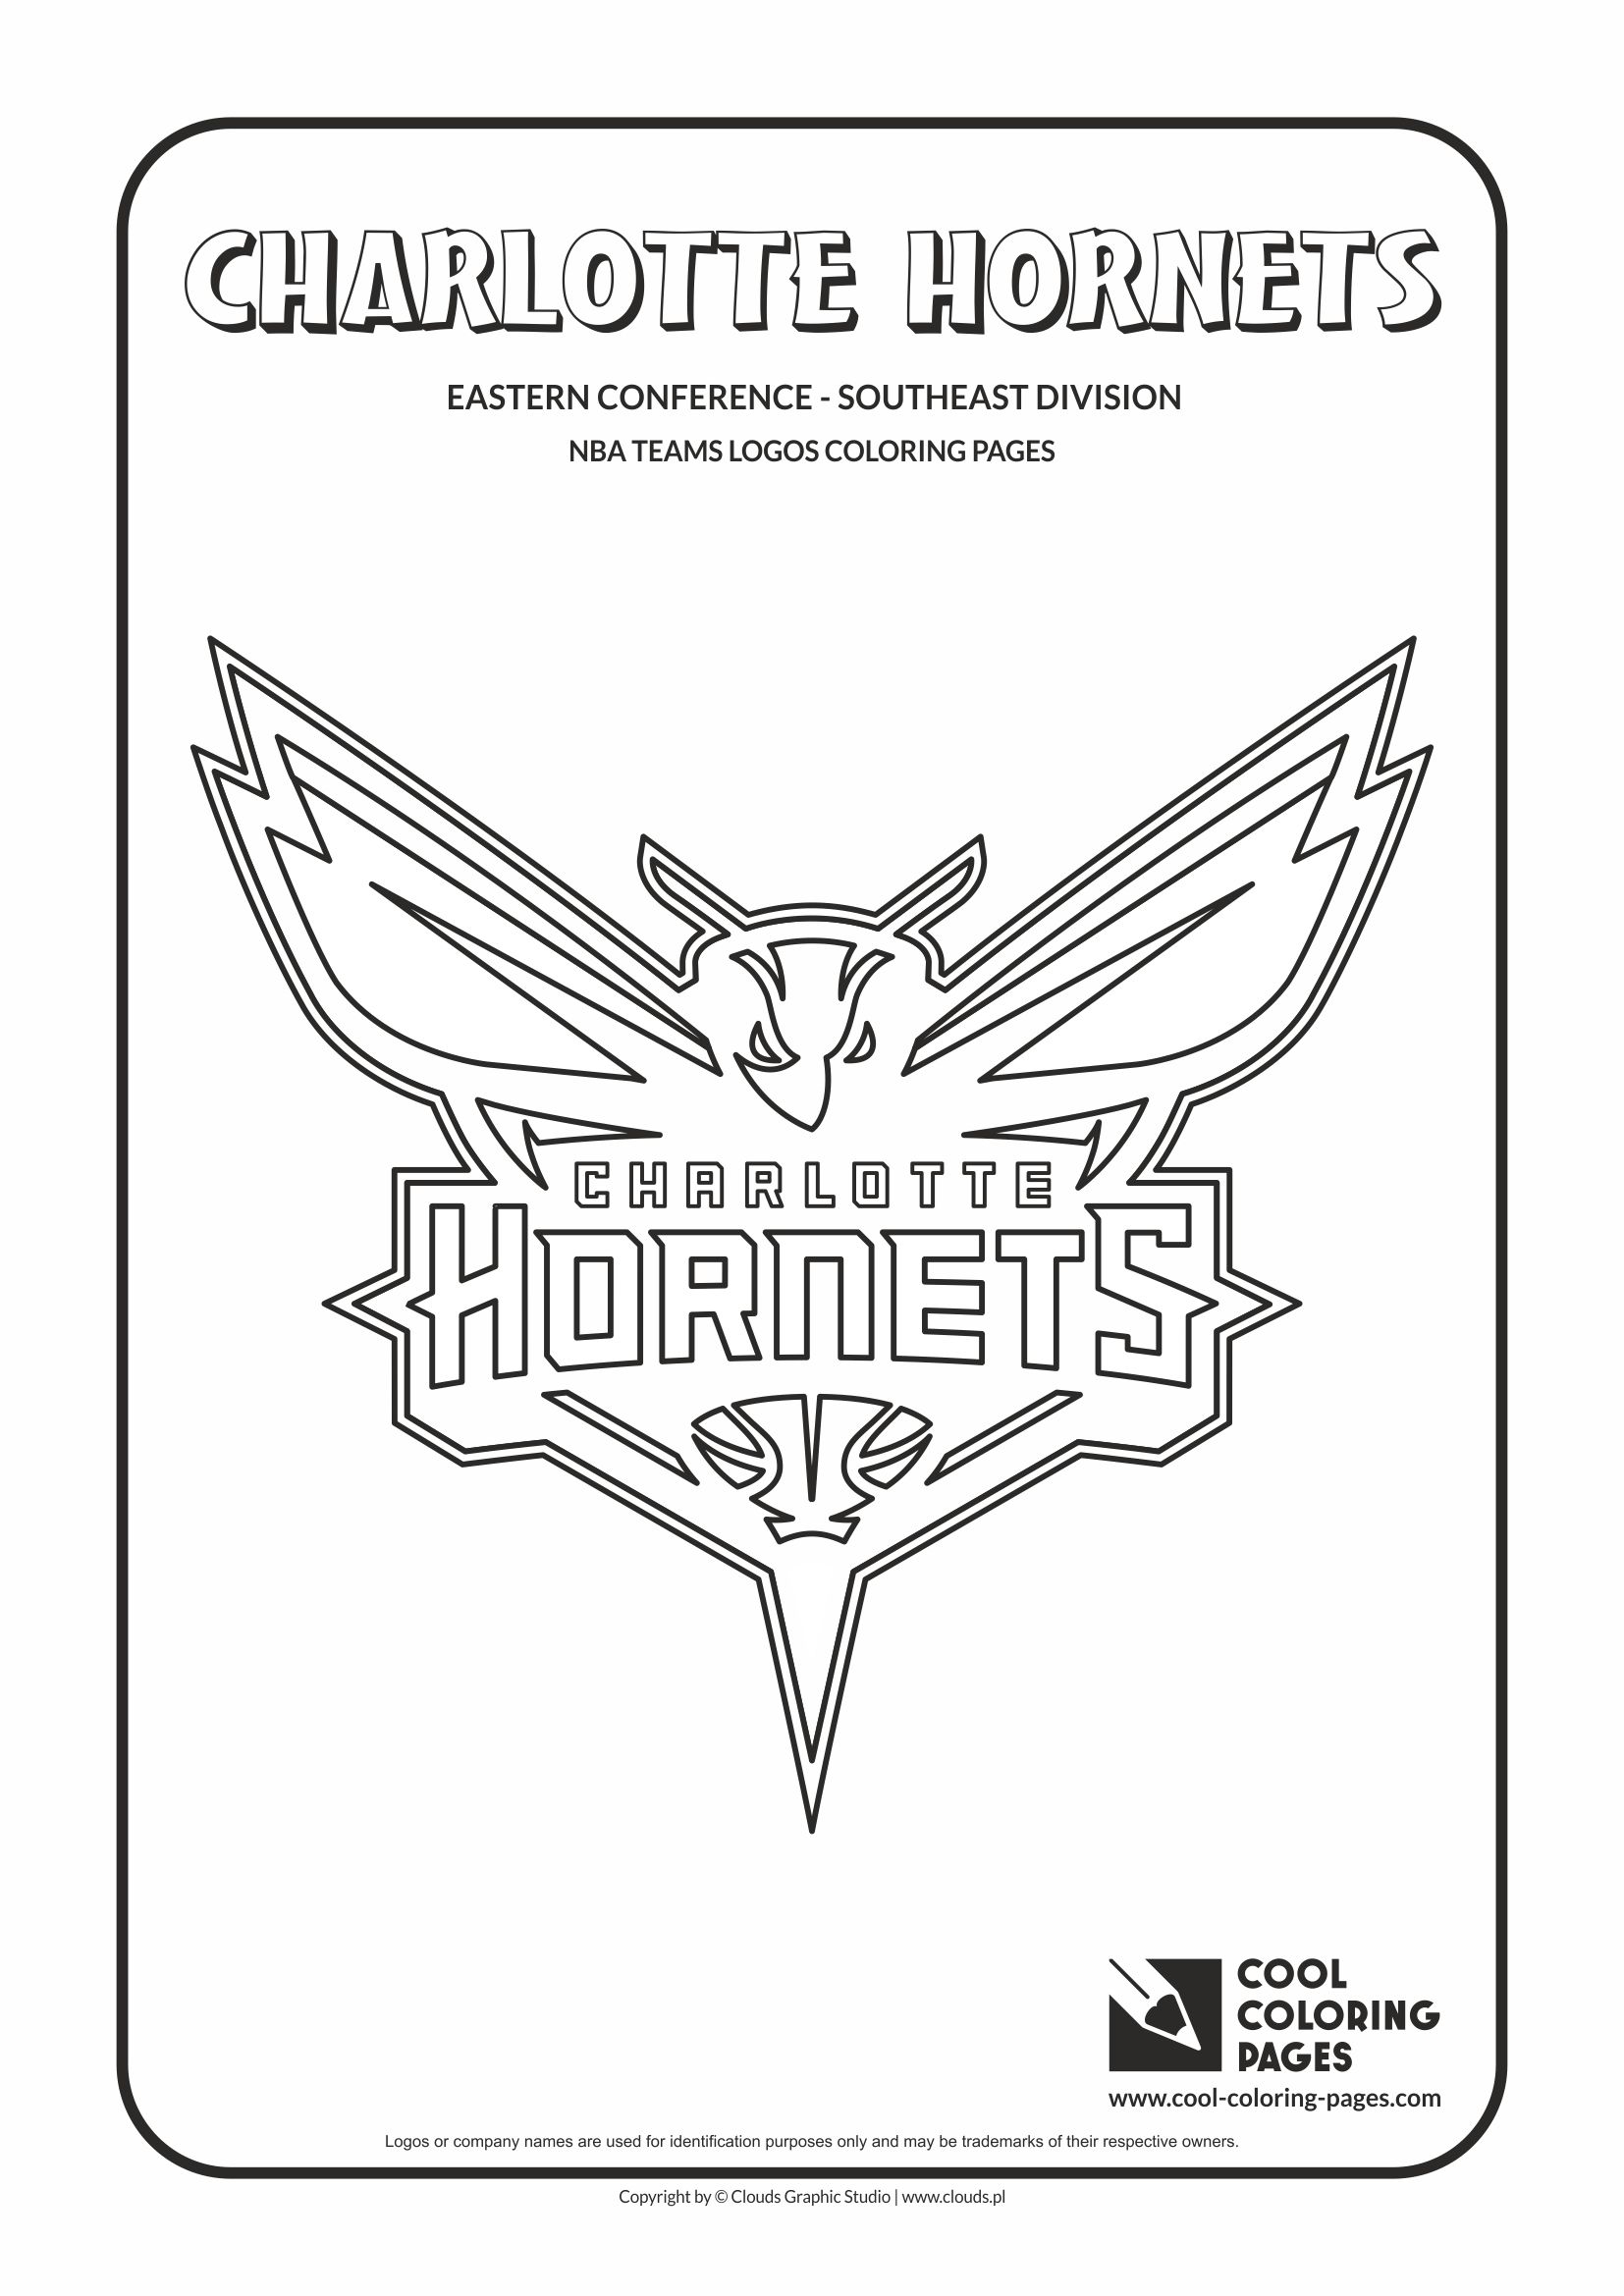 Cool Coloring Pages - NBA Basketball Clubs Logos - Easter Conference - Southeast Division / Charlotte Hornets logo / Coloring page with Charlotte Hornets logo